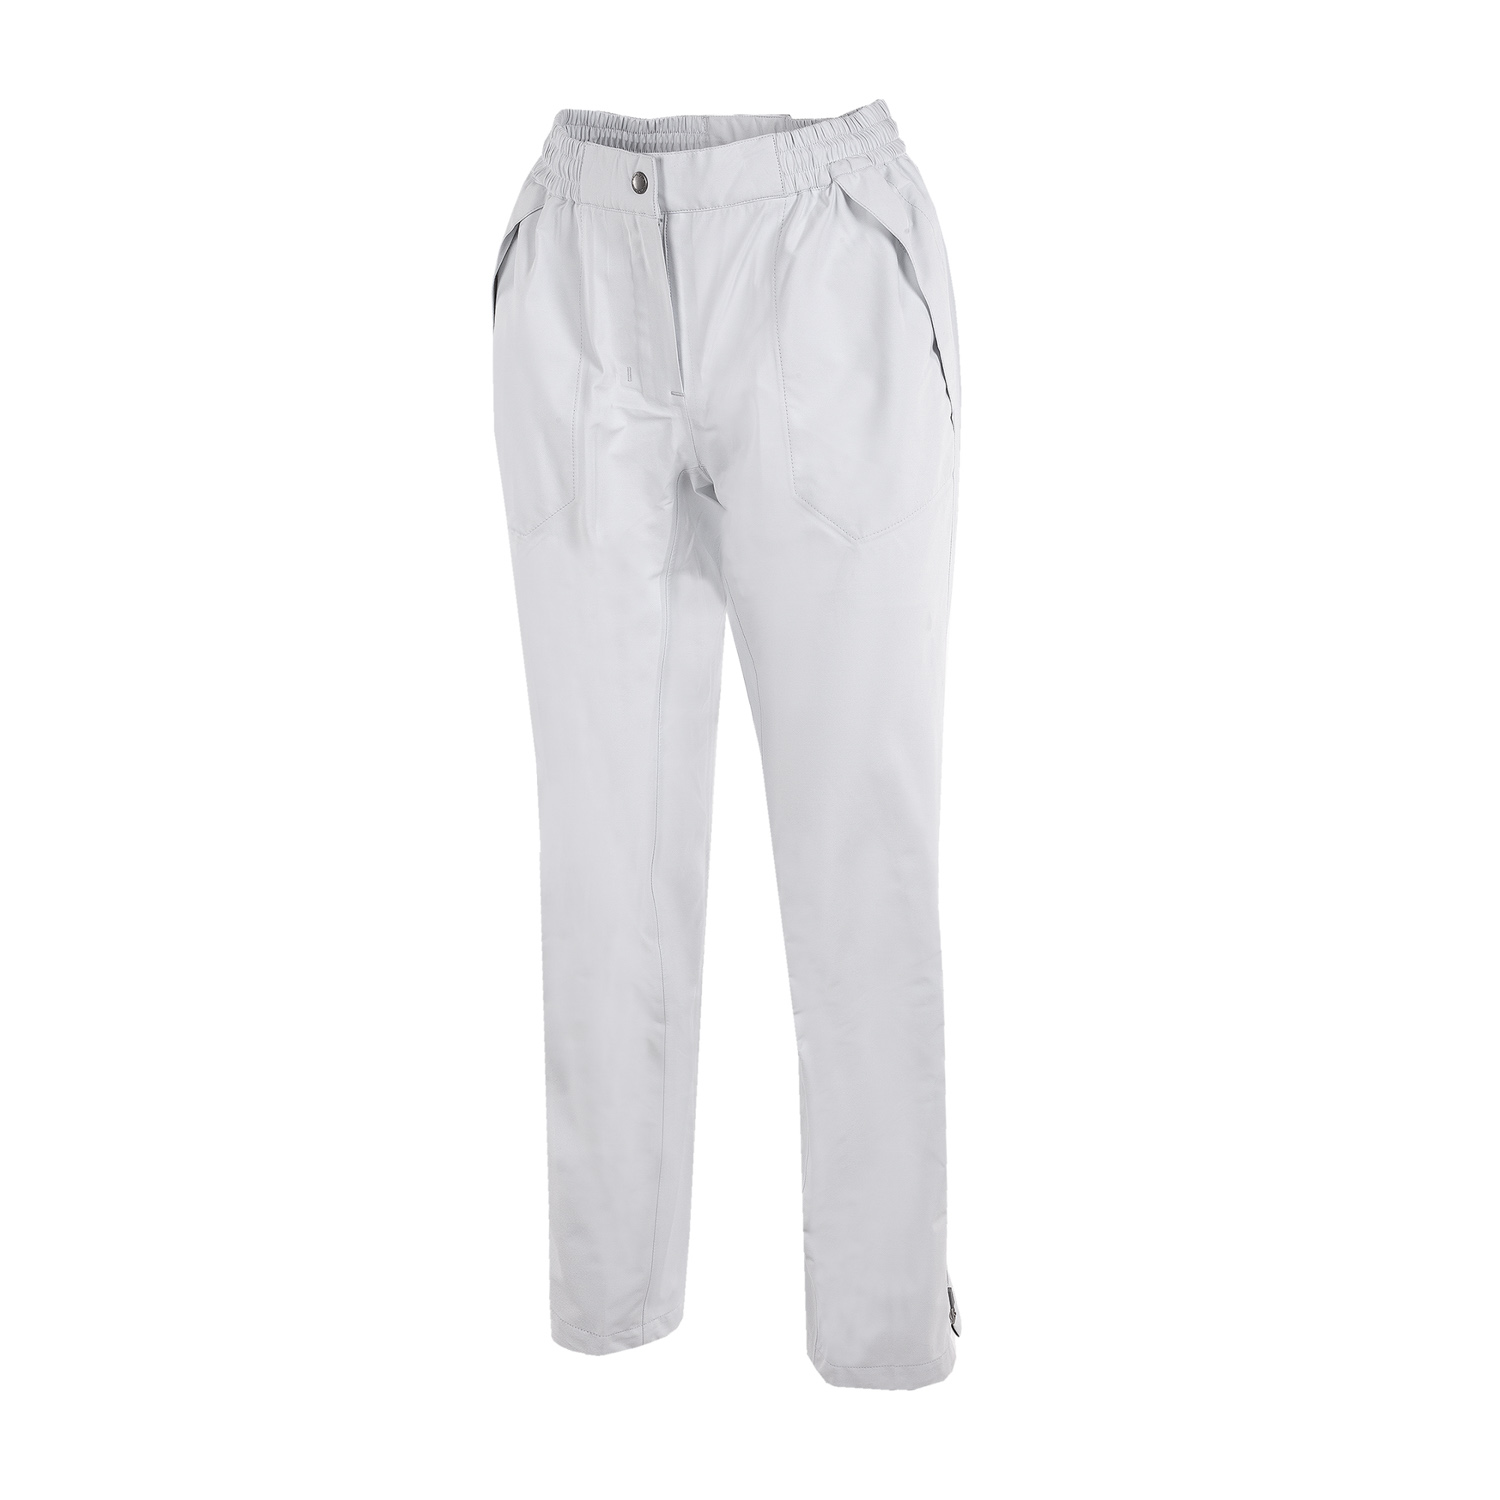 Galvin Green Men's Lane Golf Trousers | Foremost Golf | Foremost Golf